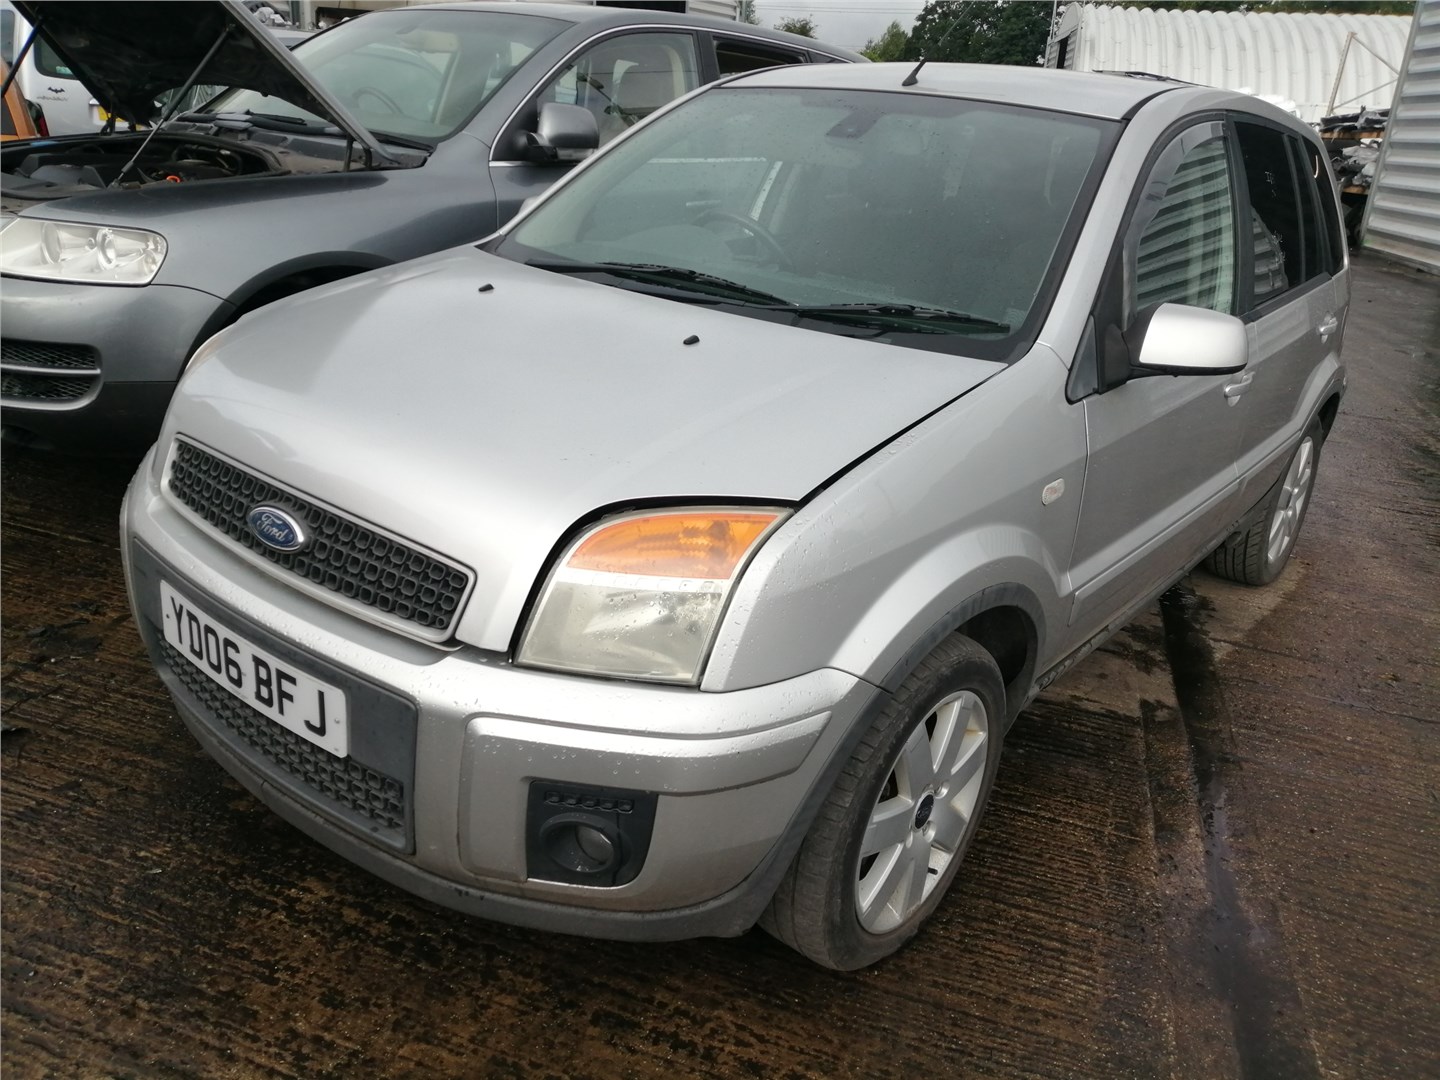 2S6T14A390AA Реле прочее Ford Fusion 2002-2012 2006